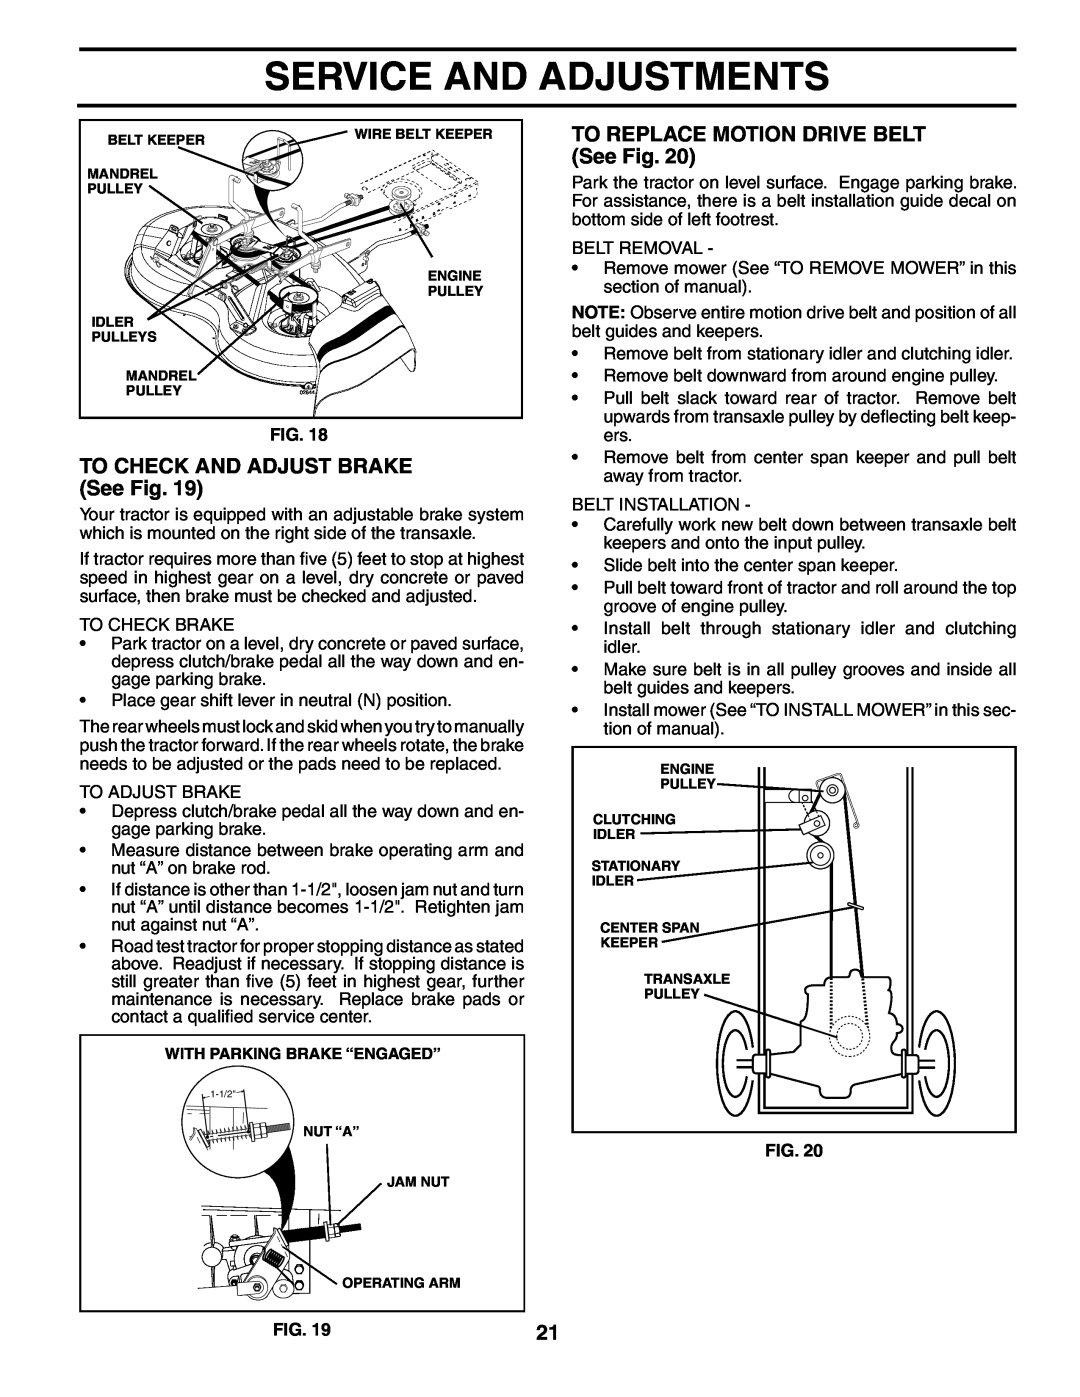 Weed Eater 96016001400 TO CHECK AND ADJUST BRAKE See Fig, TO REPLACE MOTION DRIVE BELT See Fig, Service And Adjustments 